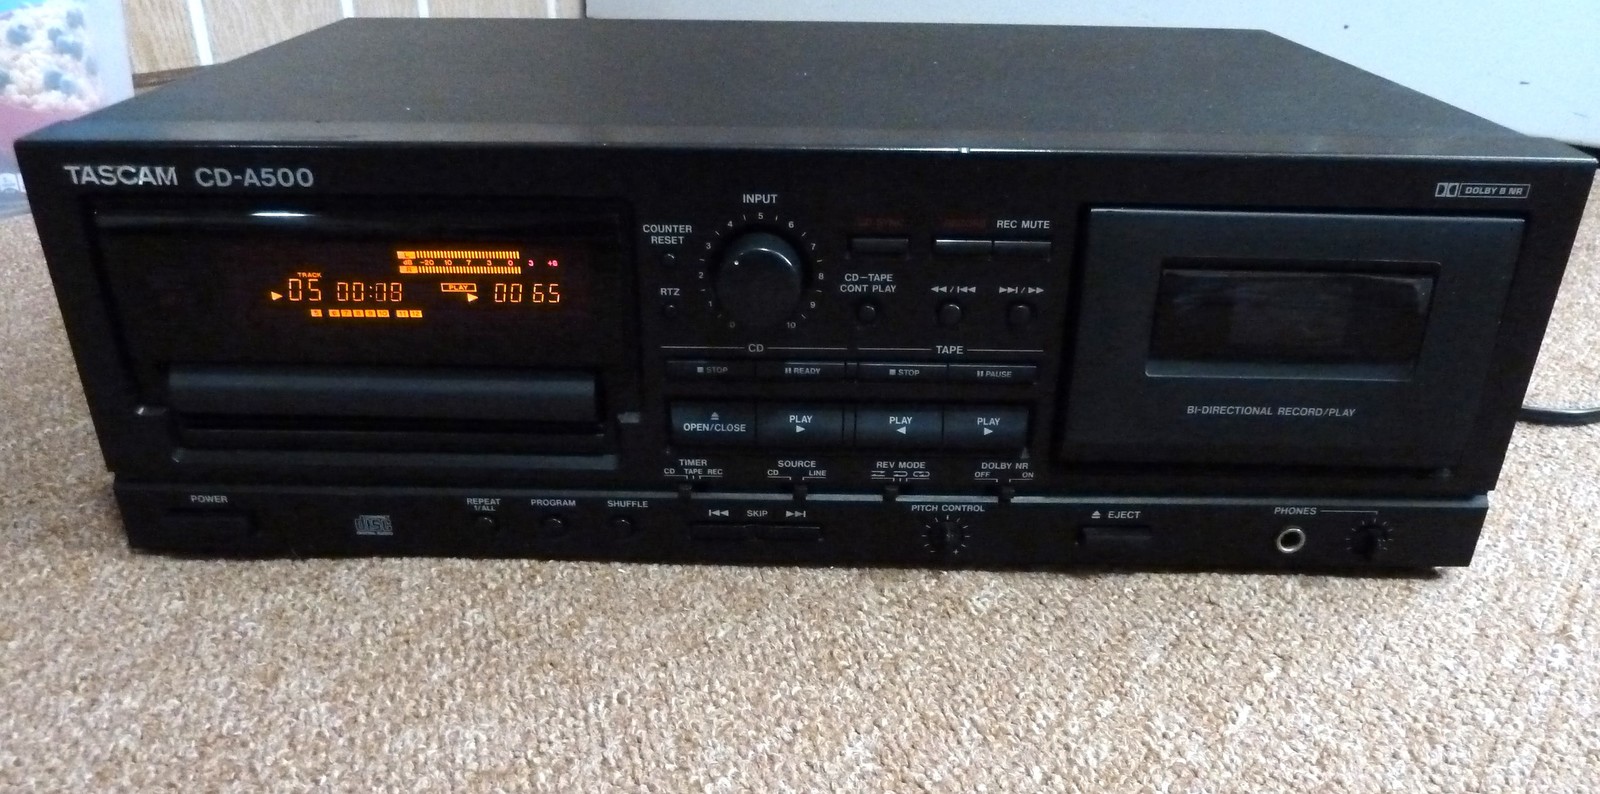 Used Tascam CD-A500 Tape recorders for Sale | HifiShark.com